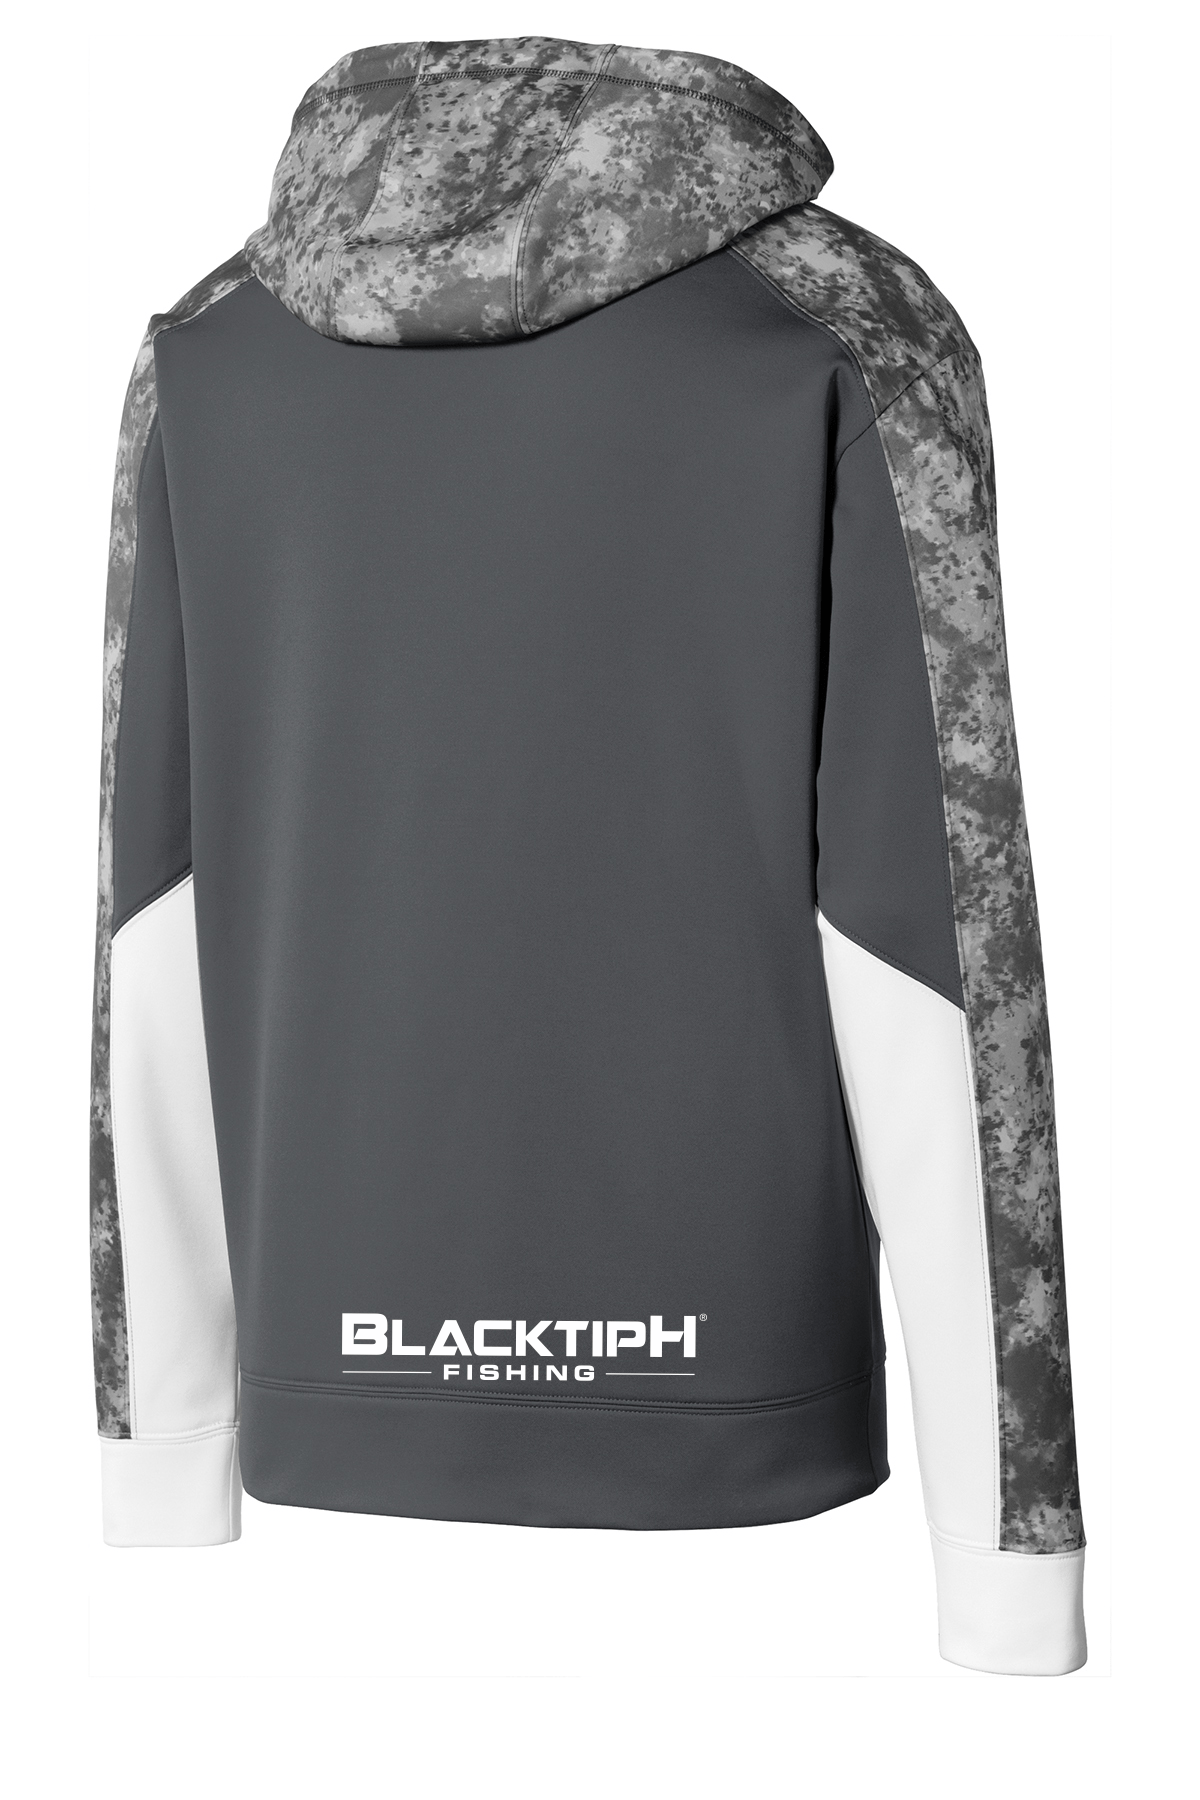 BlacktipH Youth Mineral Freeze Fleece Hooded Pullover - Grey - Angler's Pro Tackle & Outdoors